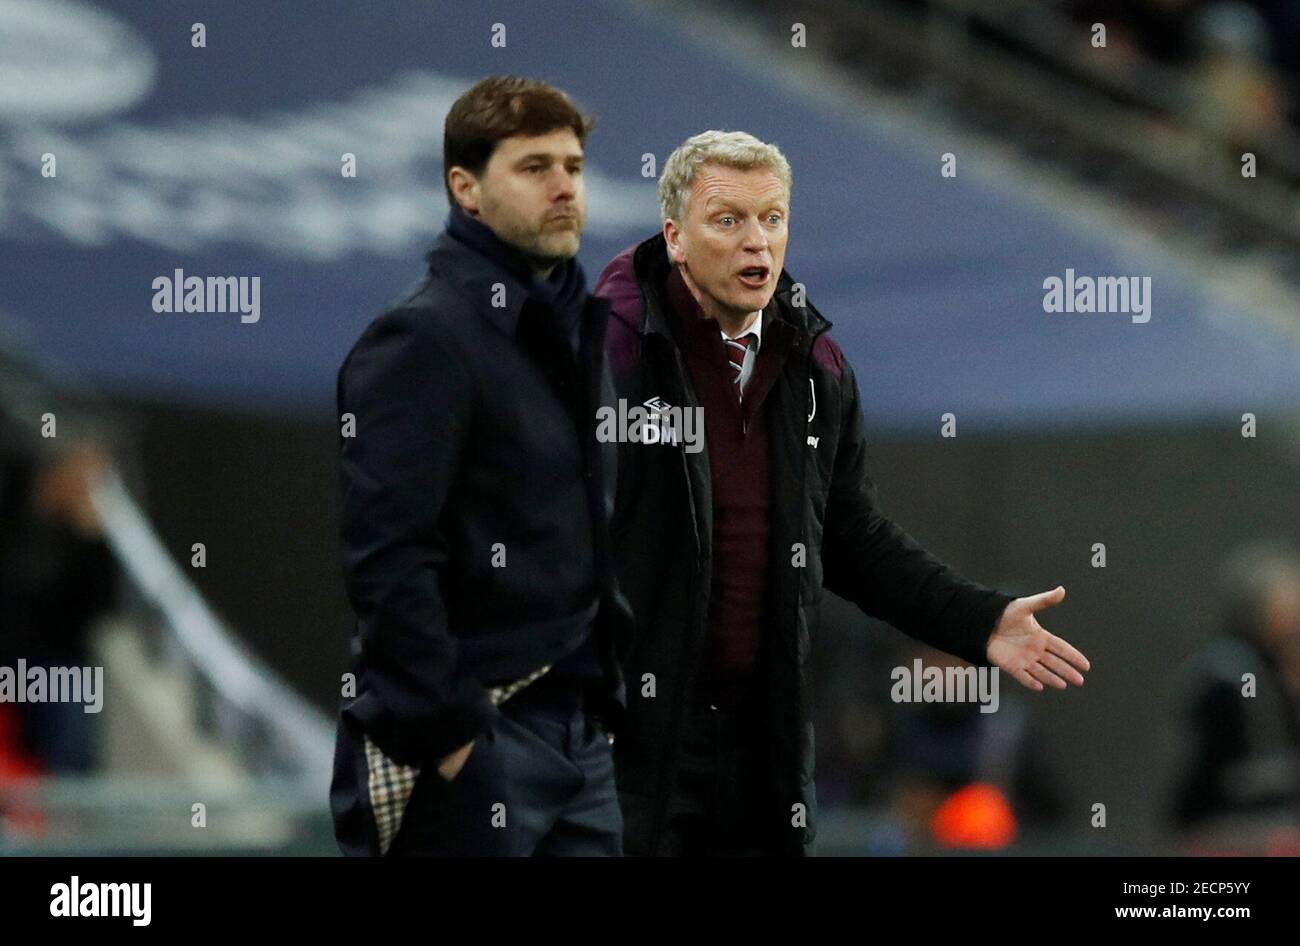 Soccer Football - Premier League - Tottenham Hotspur vs West Ham United - Wembley Stadium, London, Britain - January 4, 2018   West Ham United manager David Moyes and Tottenham manager Mauricio Pochettino    REUTERS/Eddie Keogh    EDITORIAL USE ONLY. No use with unauthorized audio, video, data, fixture lists, club/league logos or 'live' services. Online in-match use limited to 75 images, no video emulation. No use in betting, games or single club/league/player publications.  Please contact your account representative for further details. Stock Photo